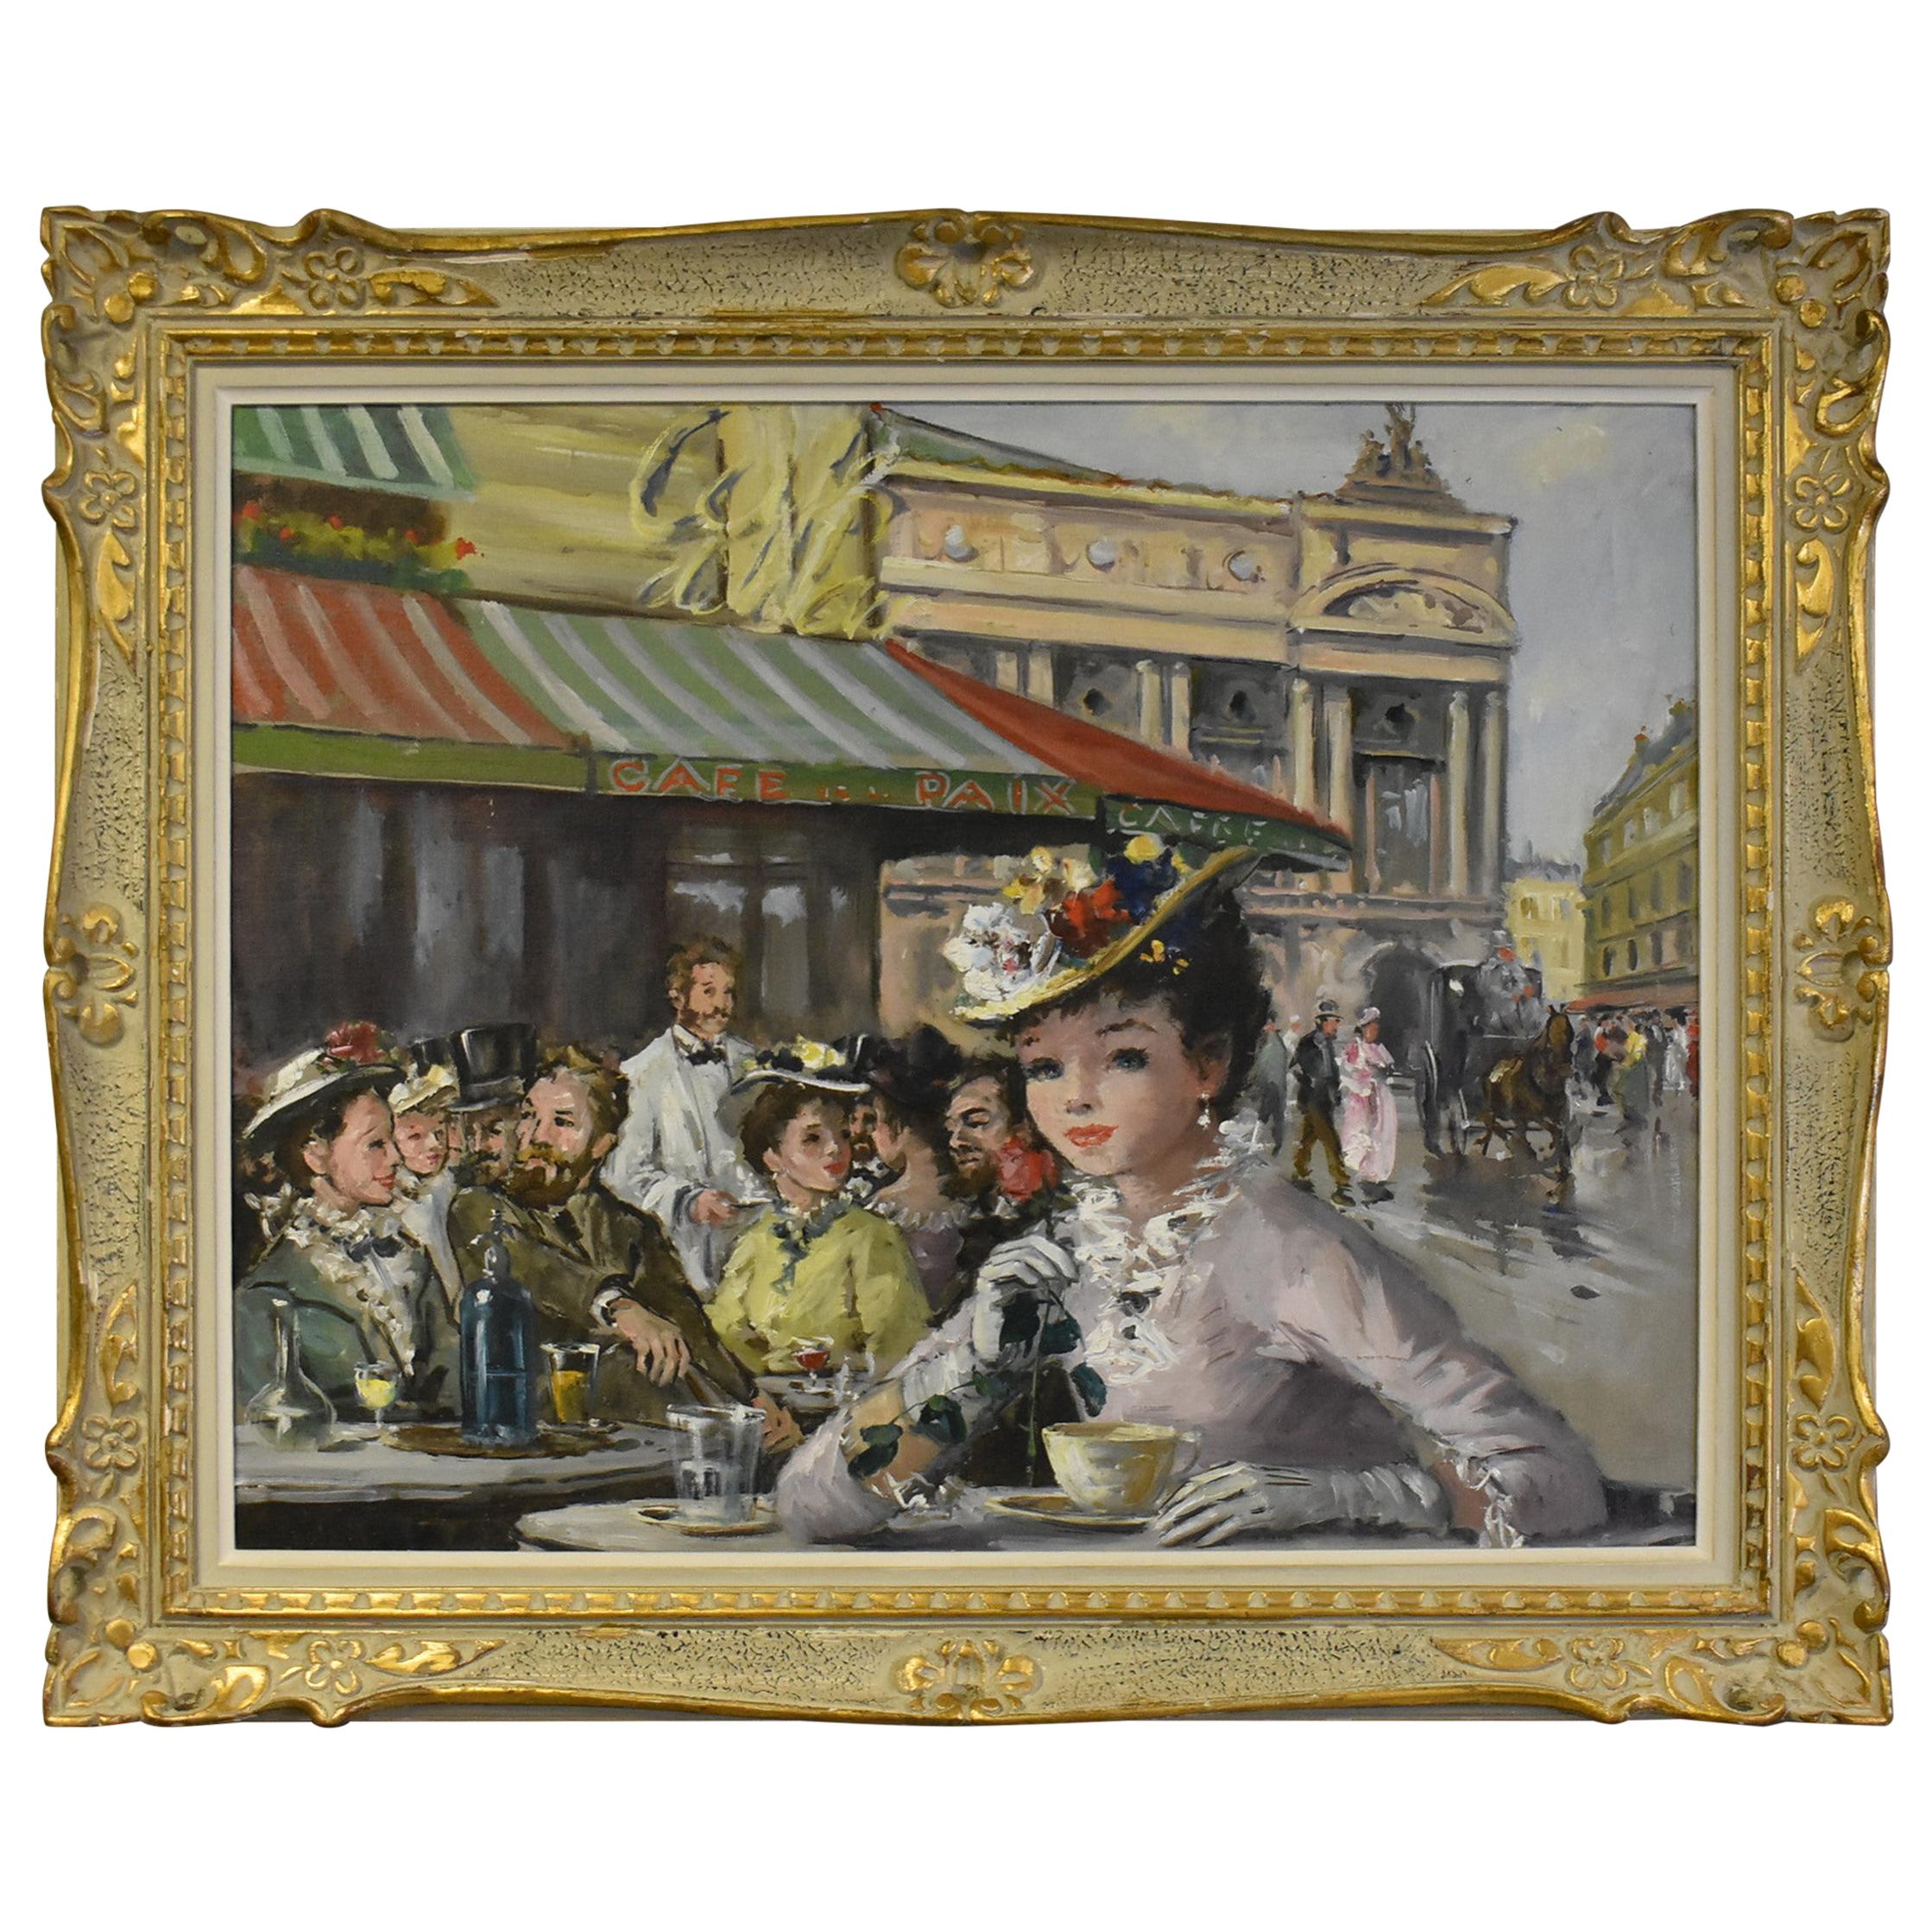 Oil Painting on Board "Cafe Paix" French Street Cafe Scene Lady in Hat 